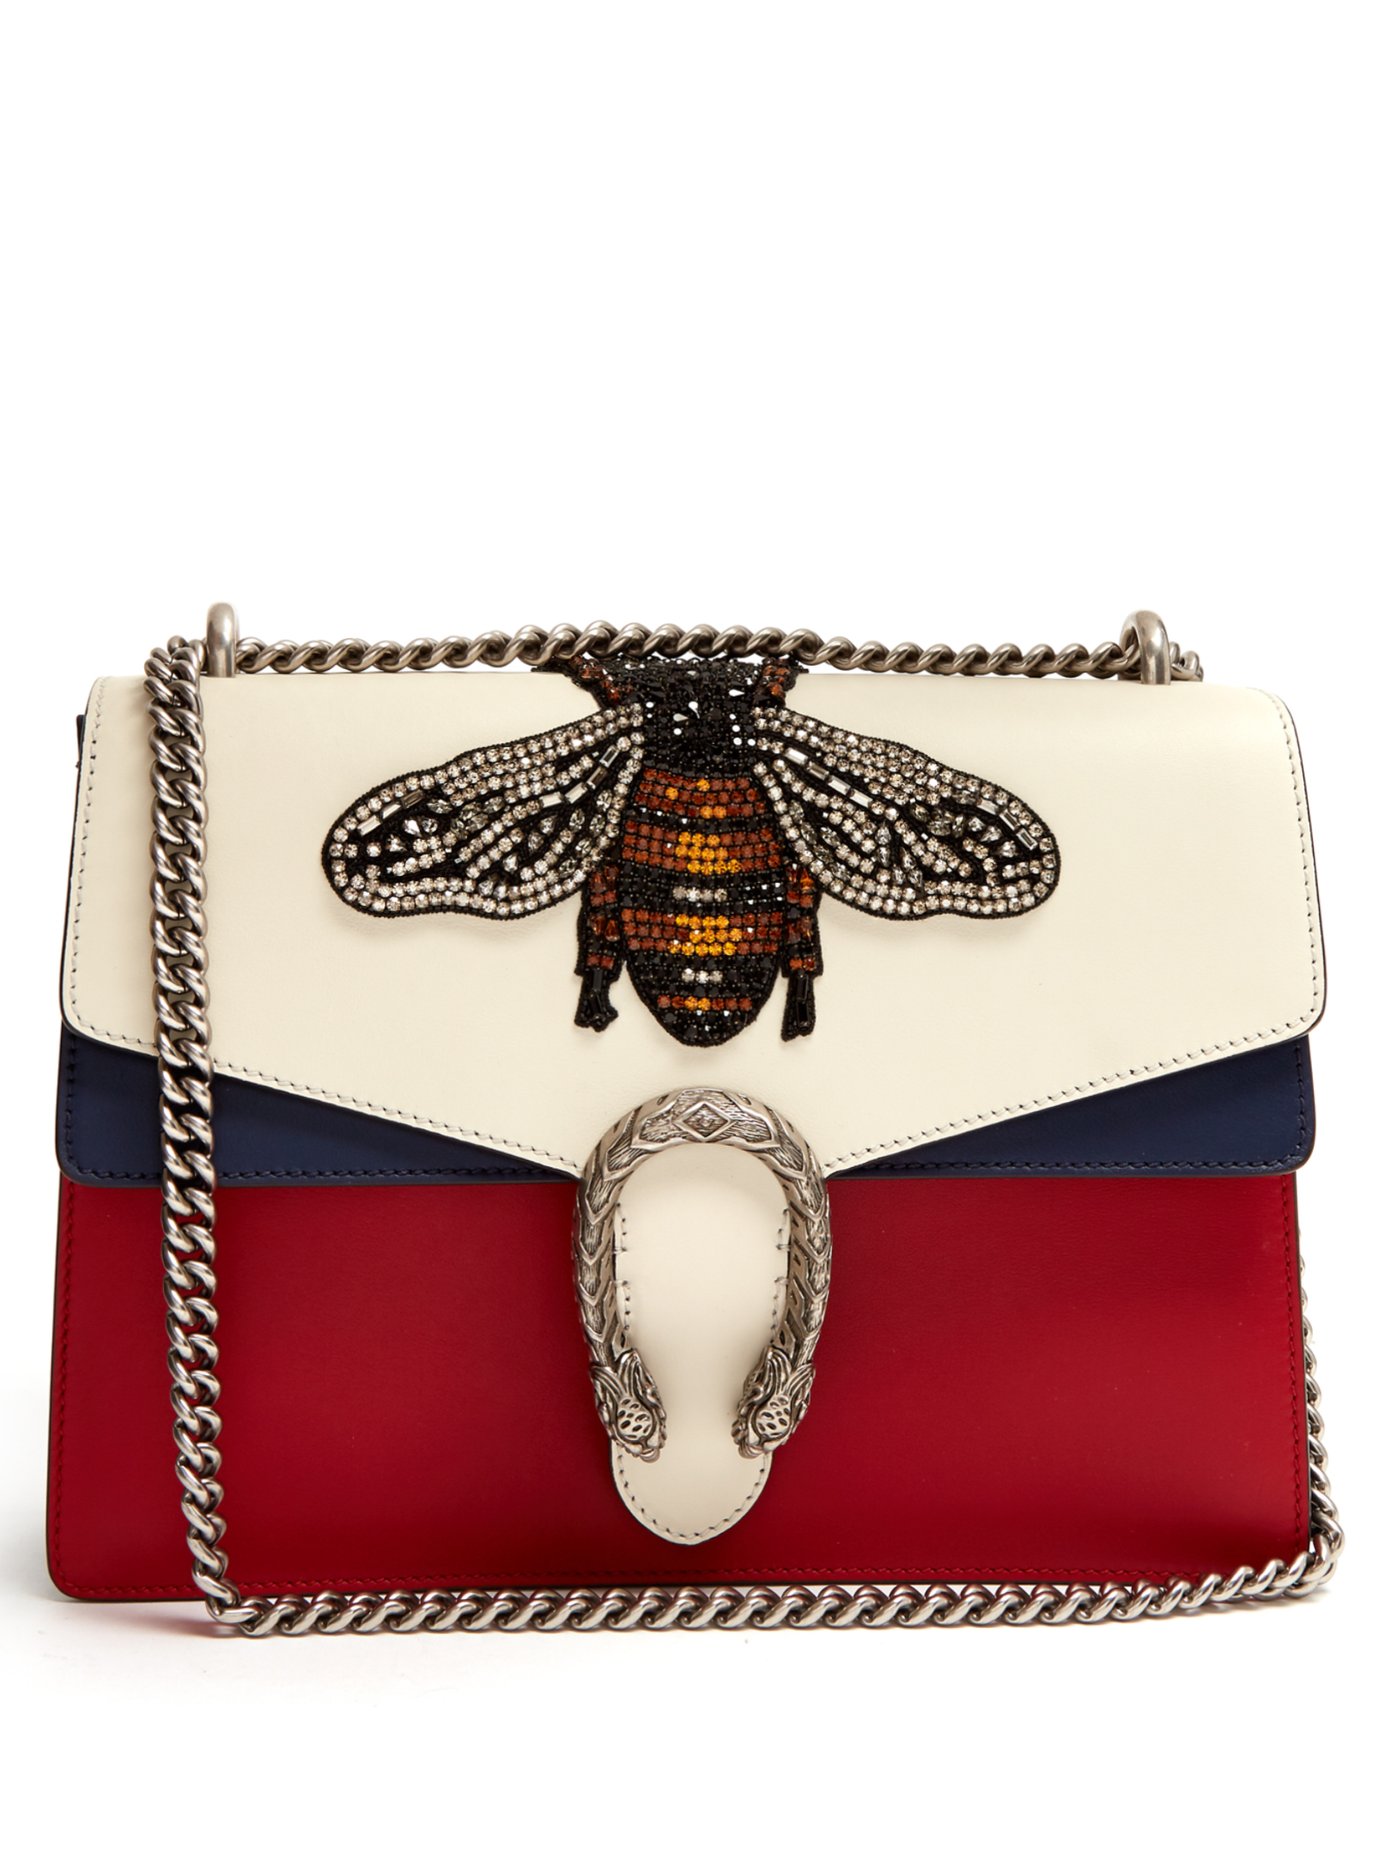 gucci bee bag red